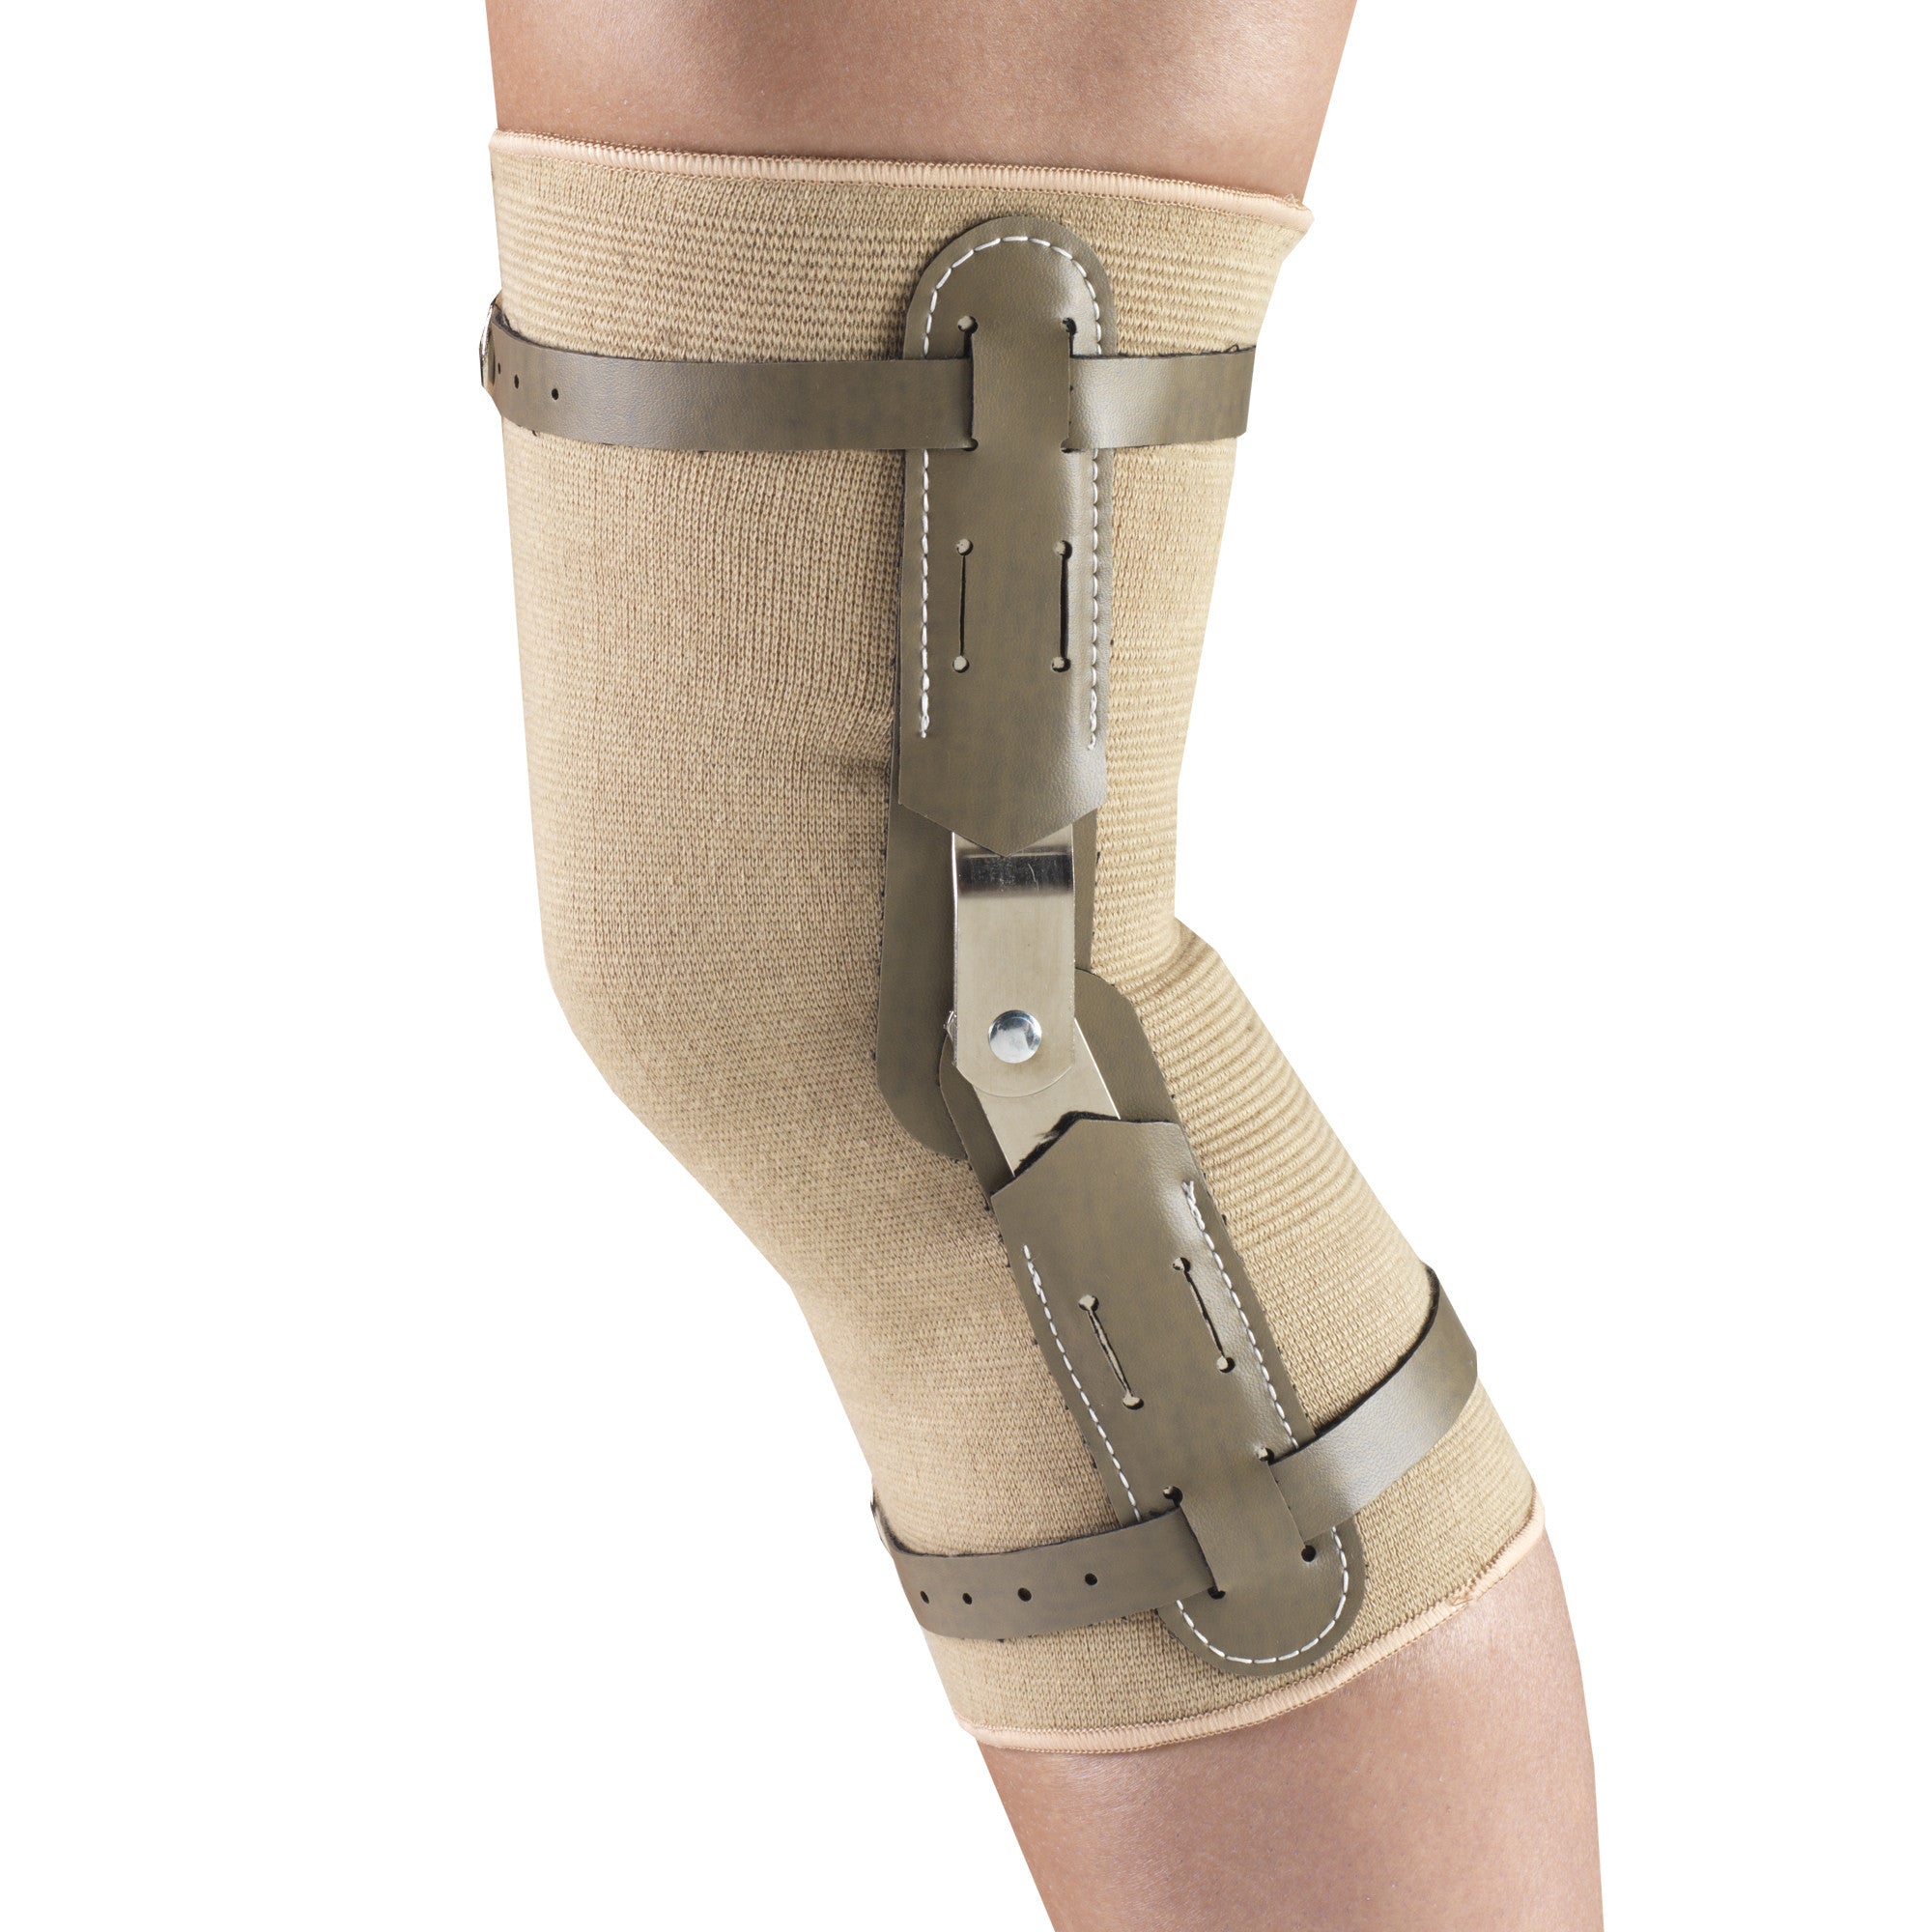 Patella knee brace • Compare & find best prices today »